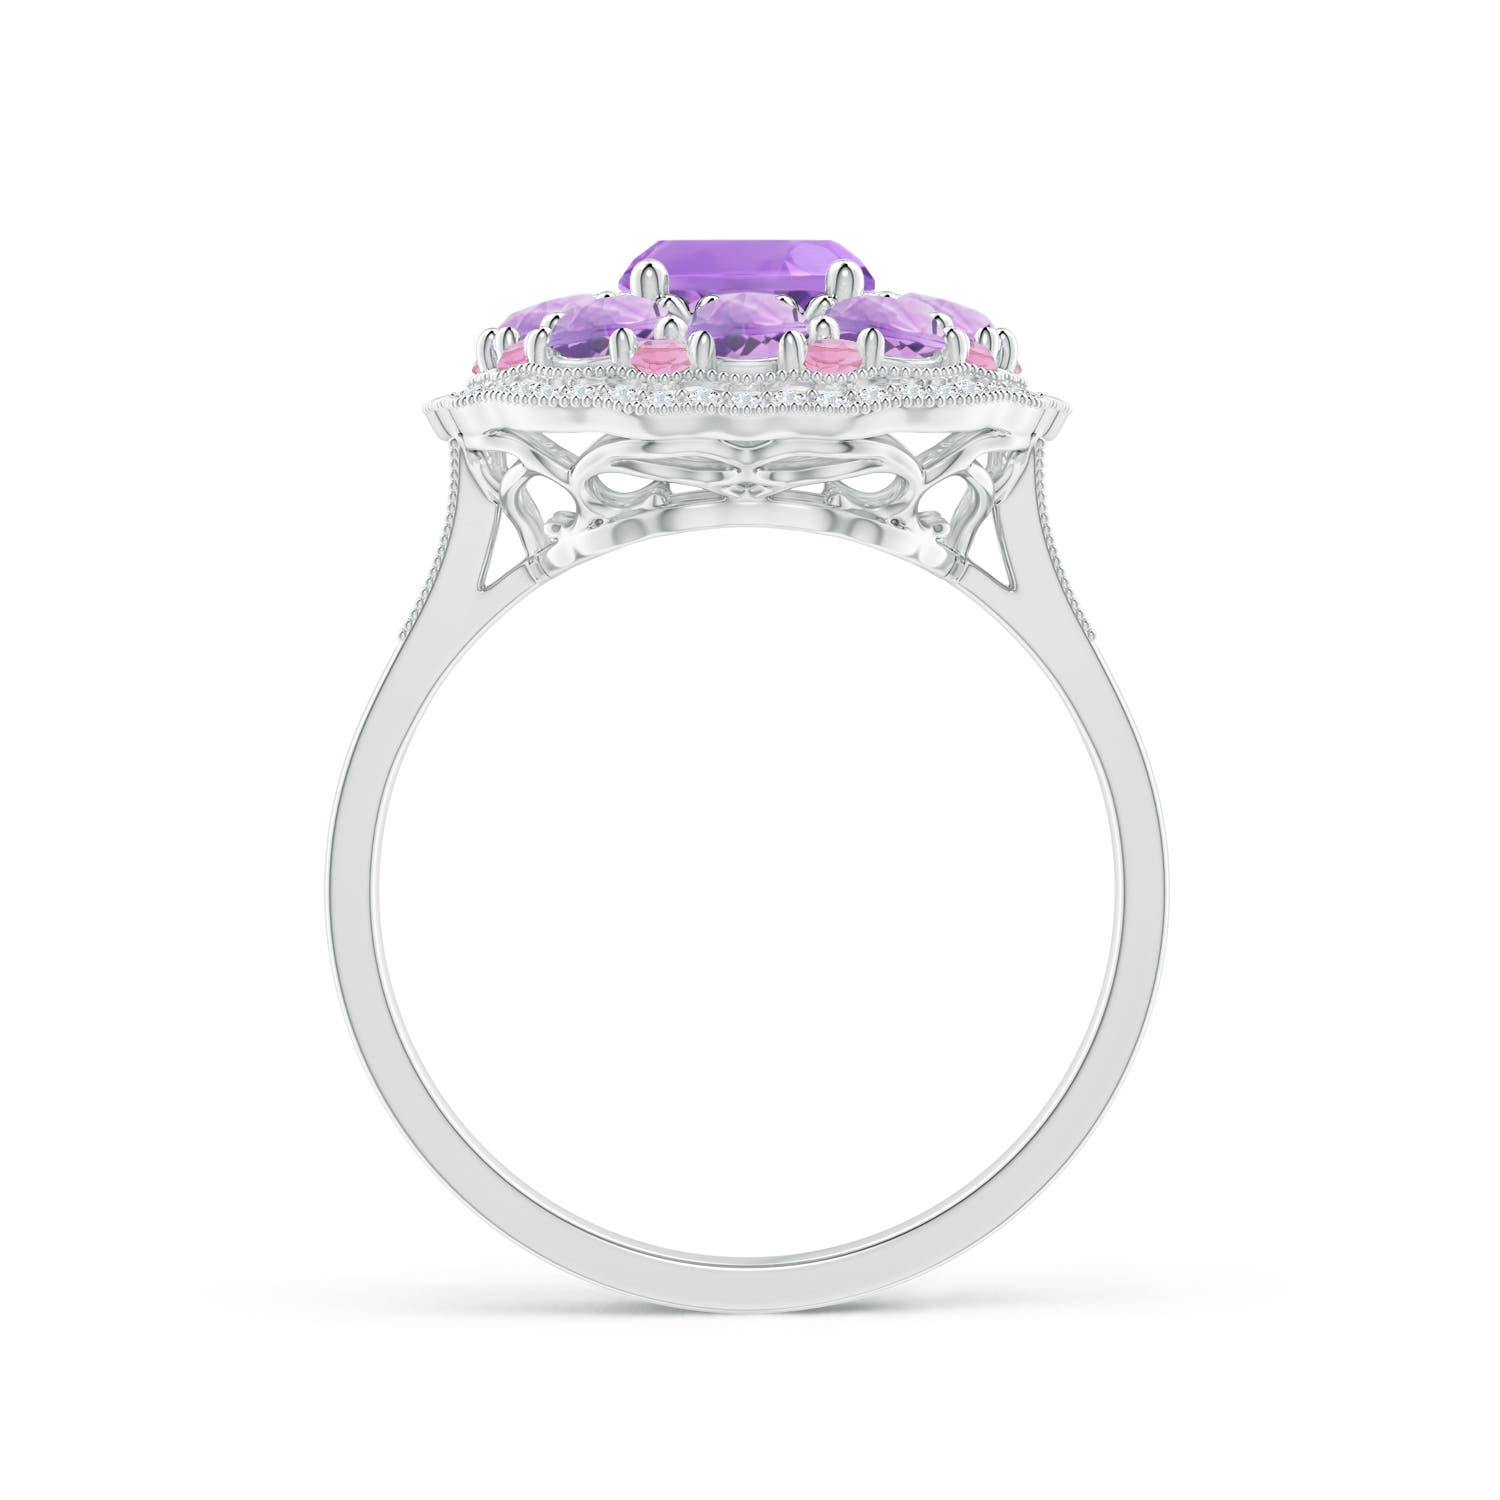 A - Amethyst / 2.58 CT / 14 KT White Gold